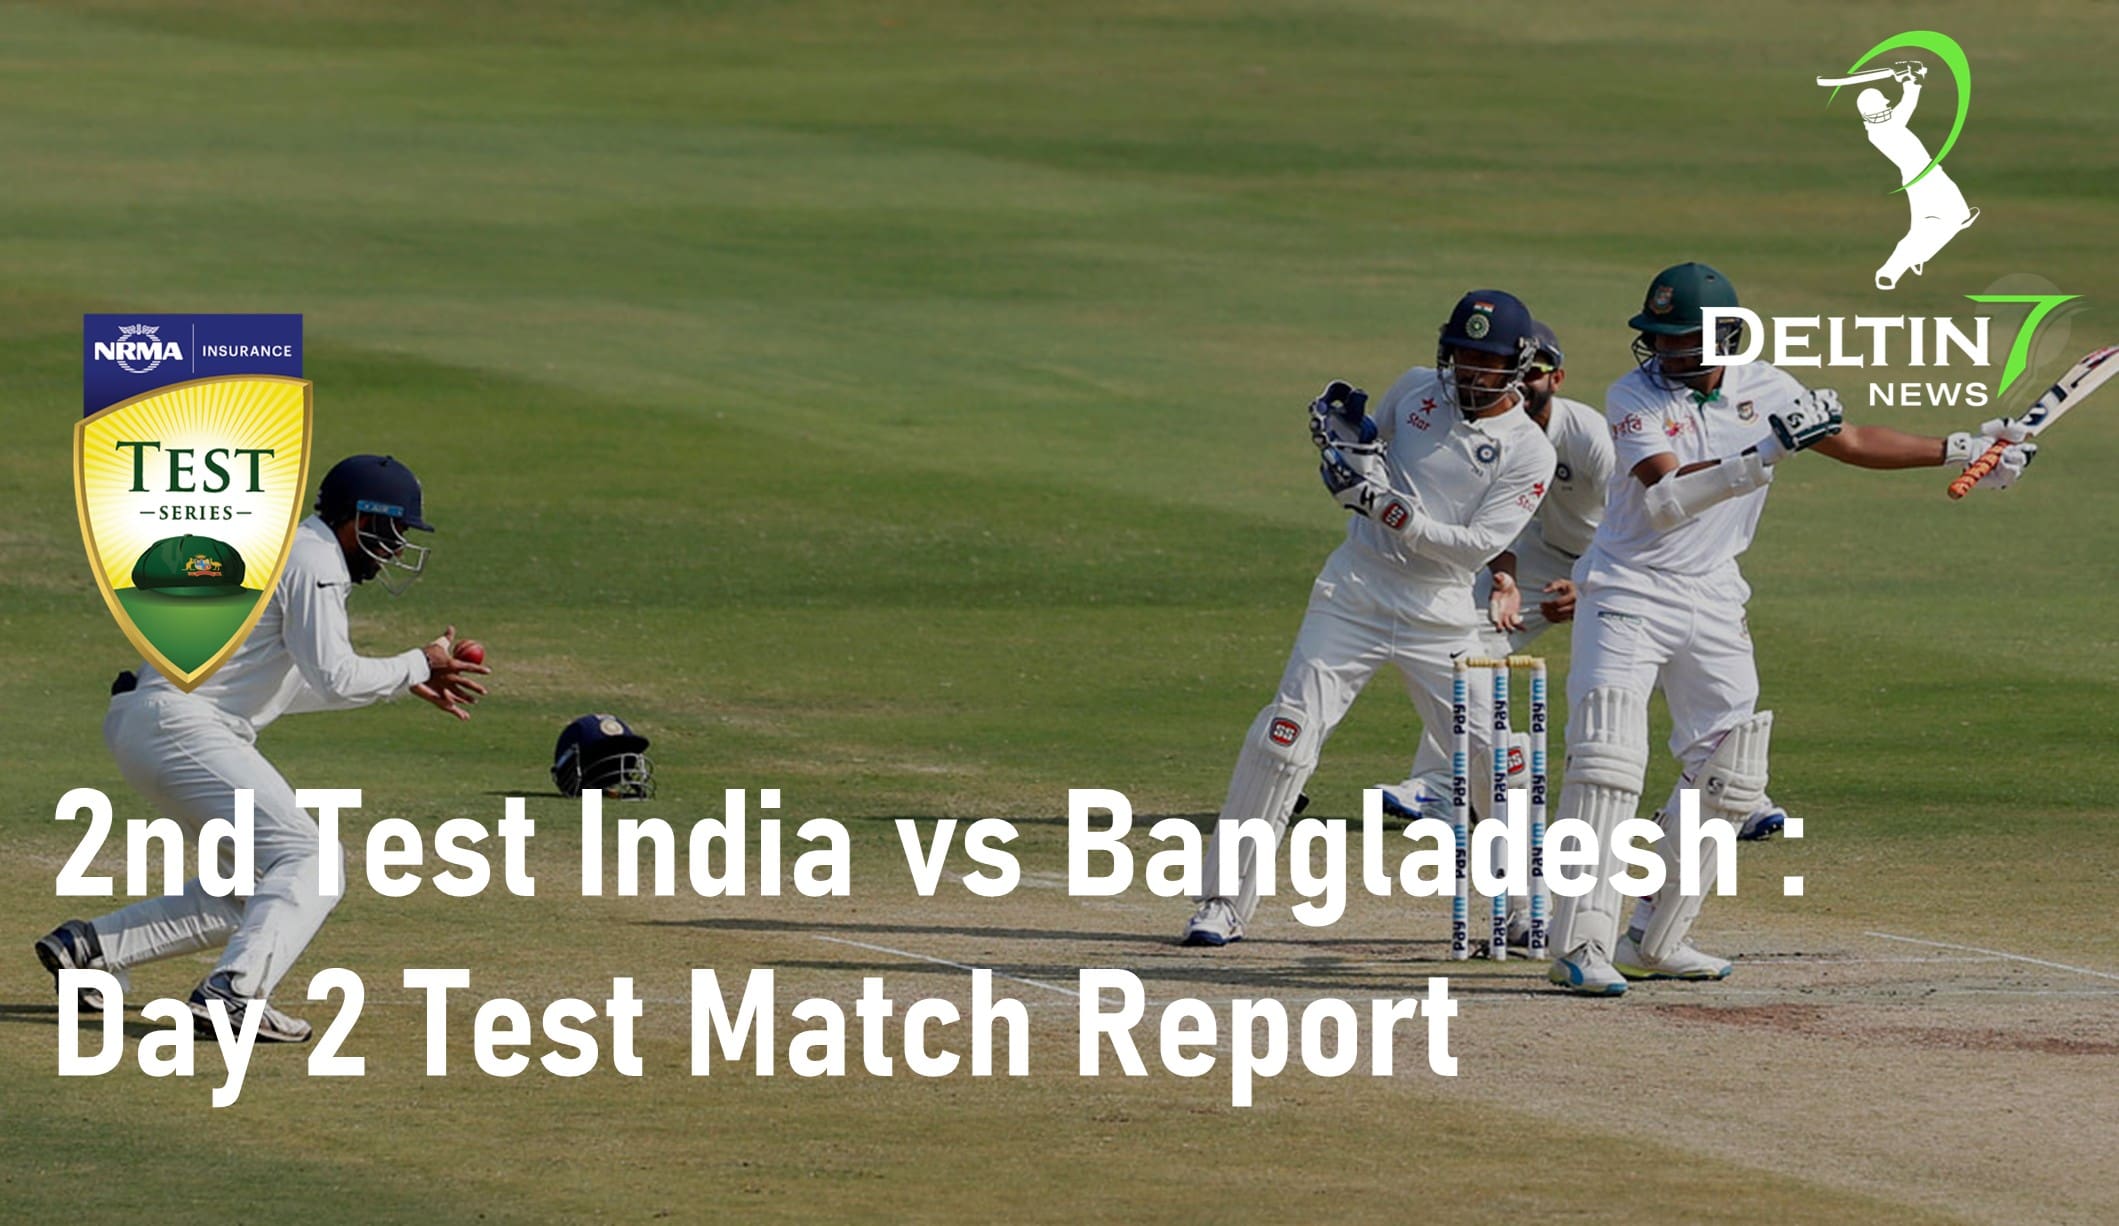 2nd Test India vs Bangladesh: Day 2 Test Match Report